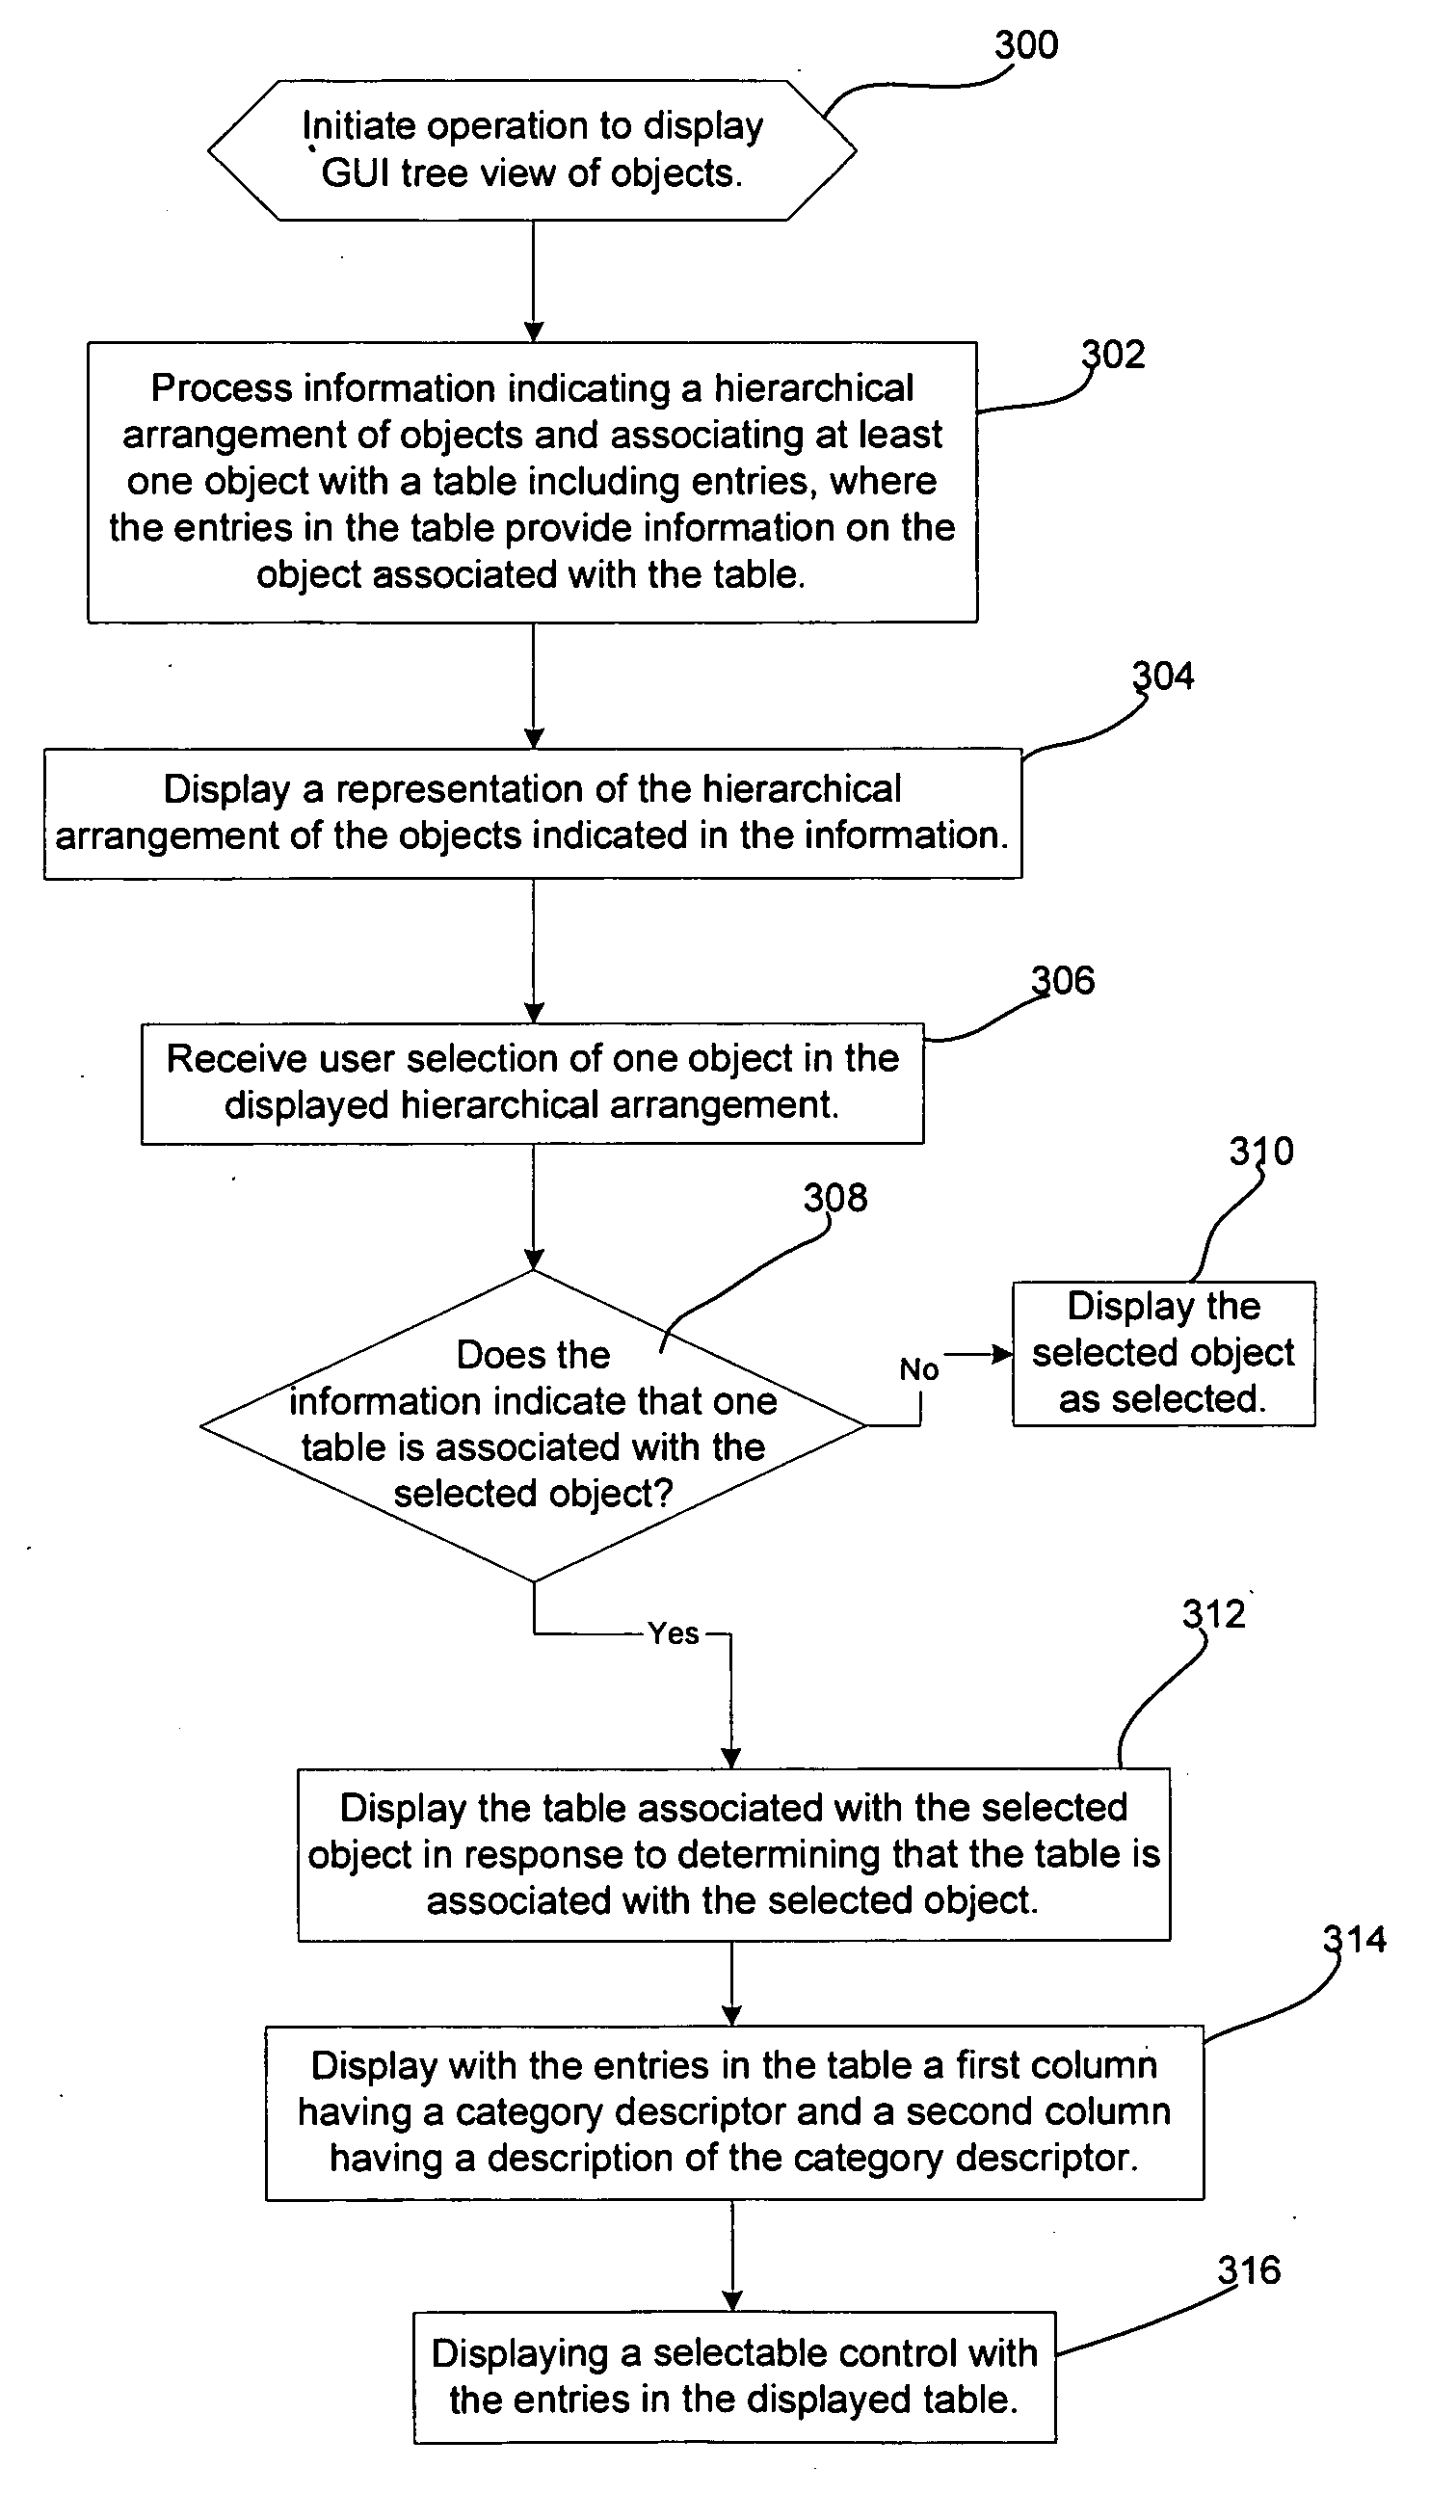 Providing additional hierarchical information for an object displayed in a tree view in a hierarchical relationship with other objects